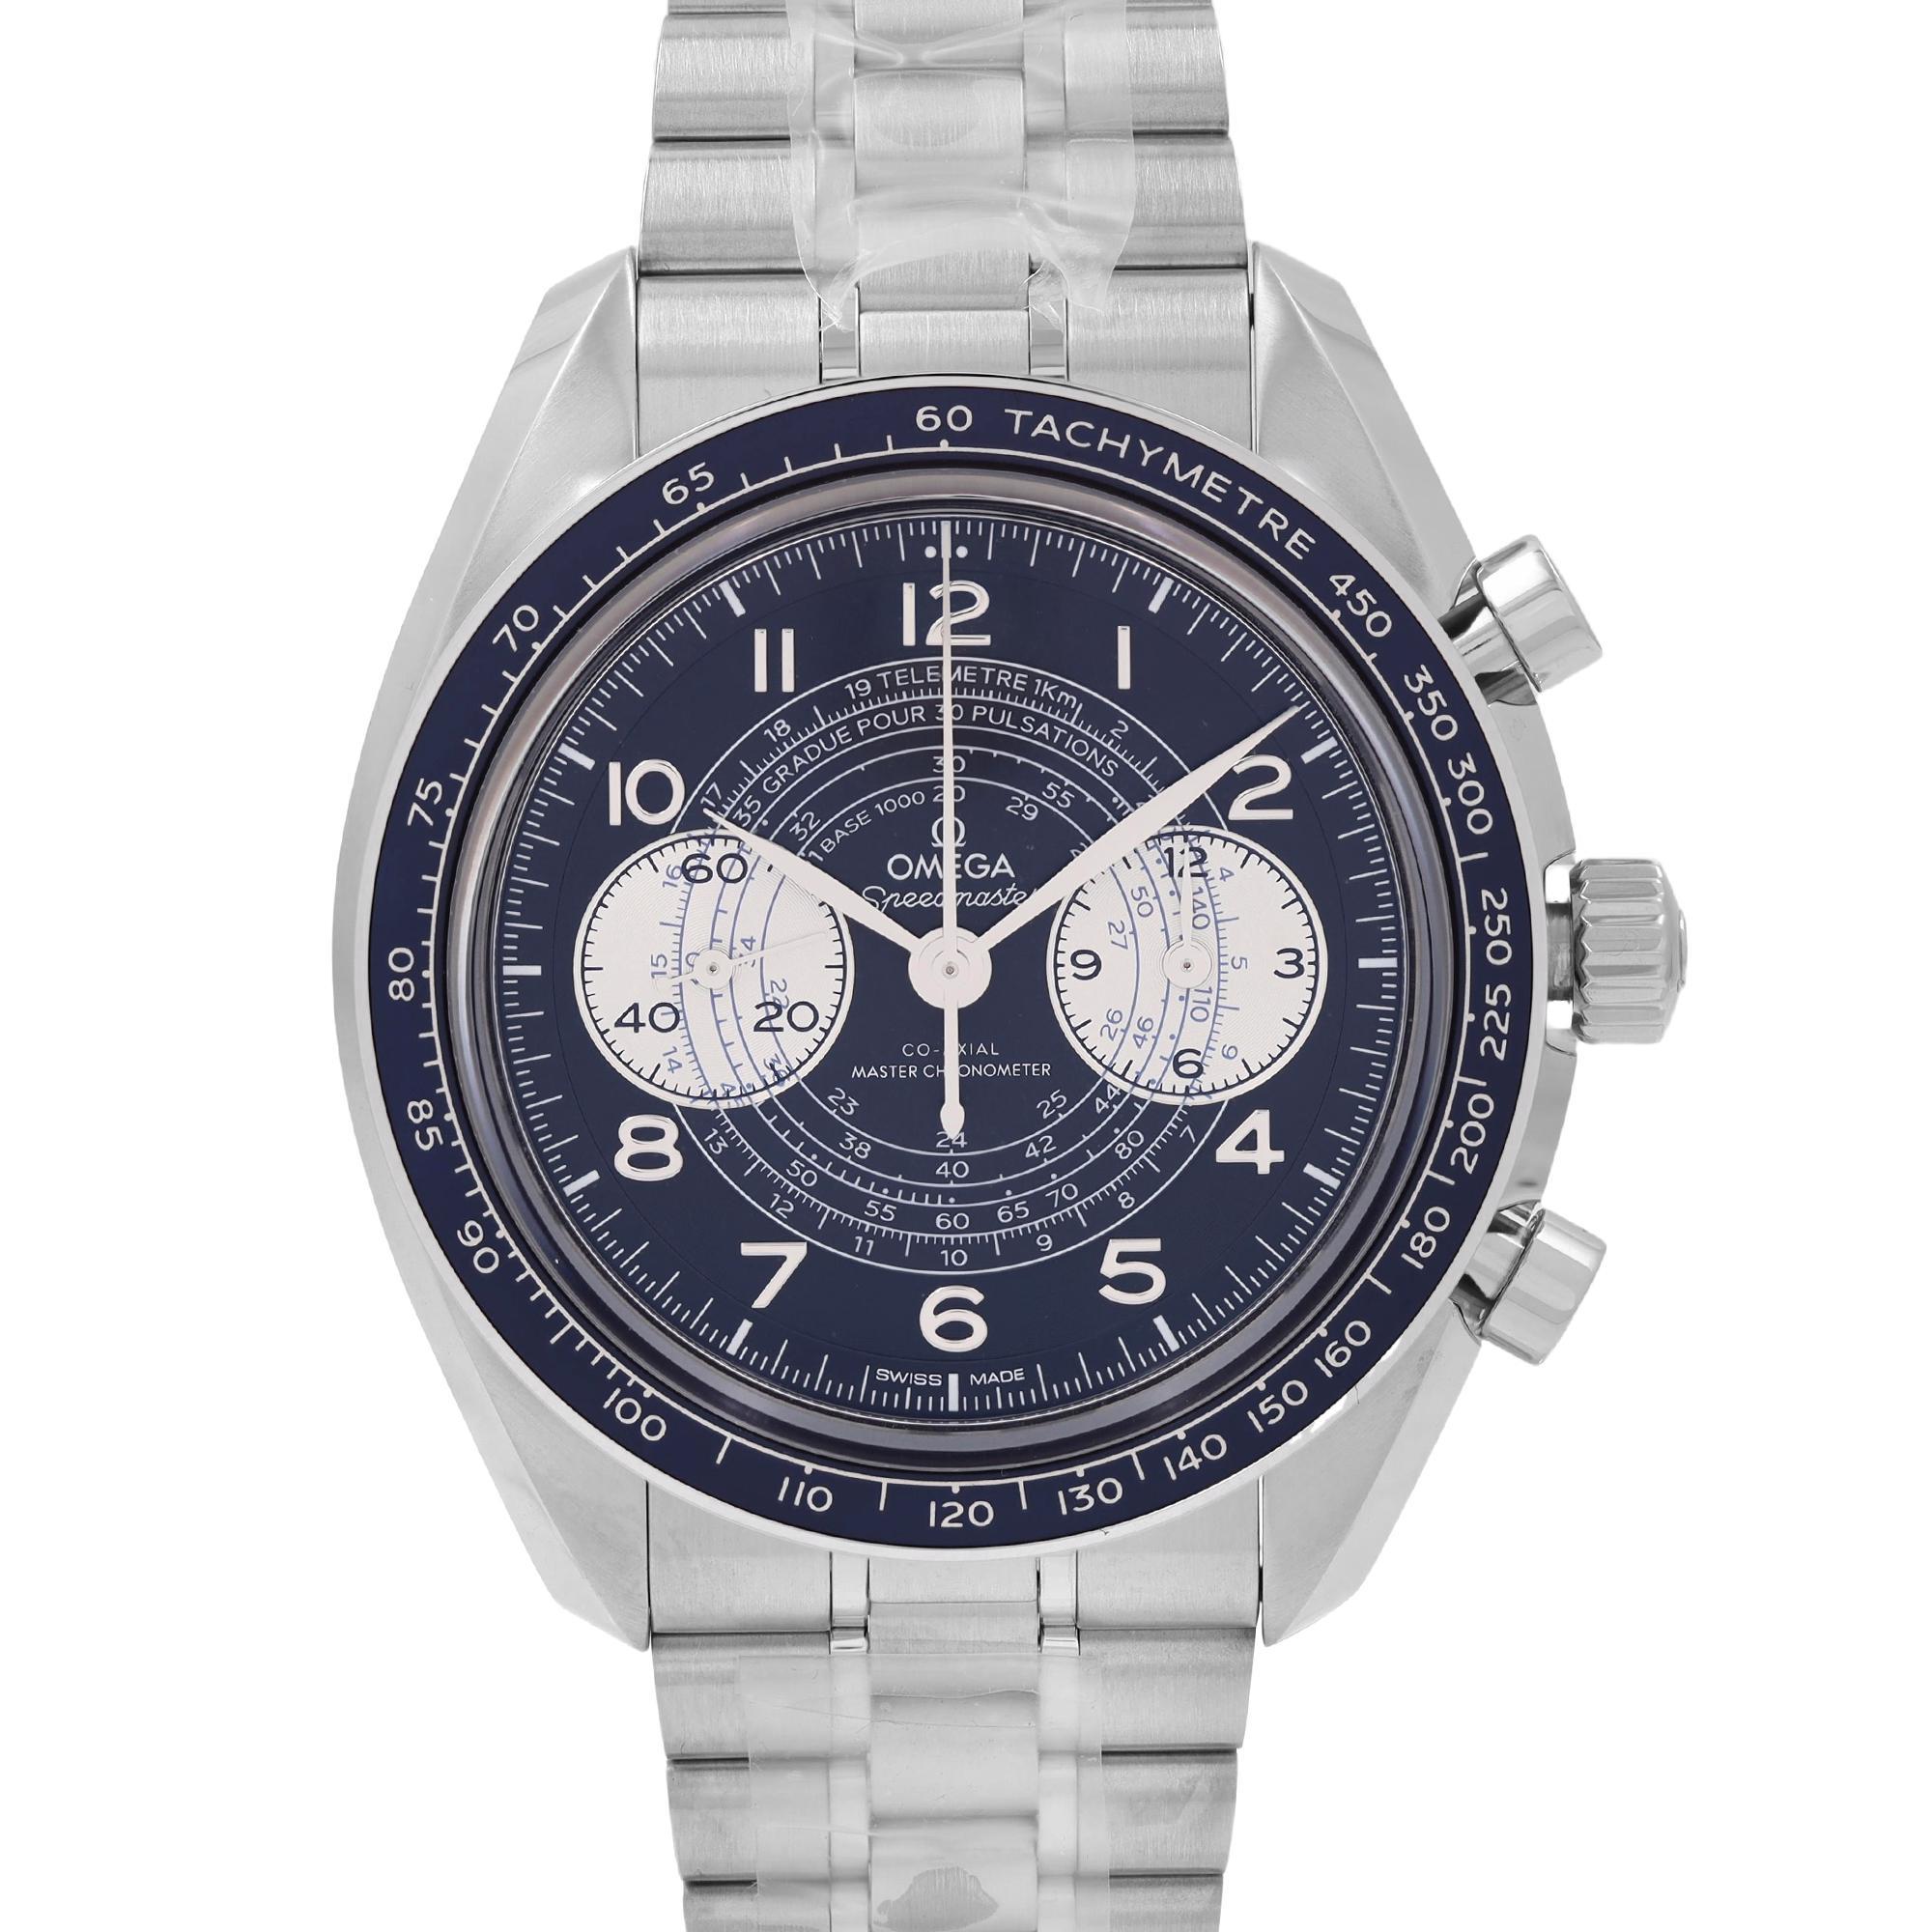 Unworn Omega Speedmaster Chronoscope Steel Blue Dial Hand-Wind Men's Watch 329.30.43.51.03.001. This Beautiful Timepiece is Powered by an Automatic Movement and Features: Stainless Steel Case & Bracelet Fixed Stainless Steel Bezel with Blue